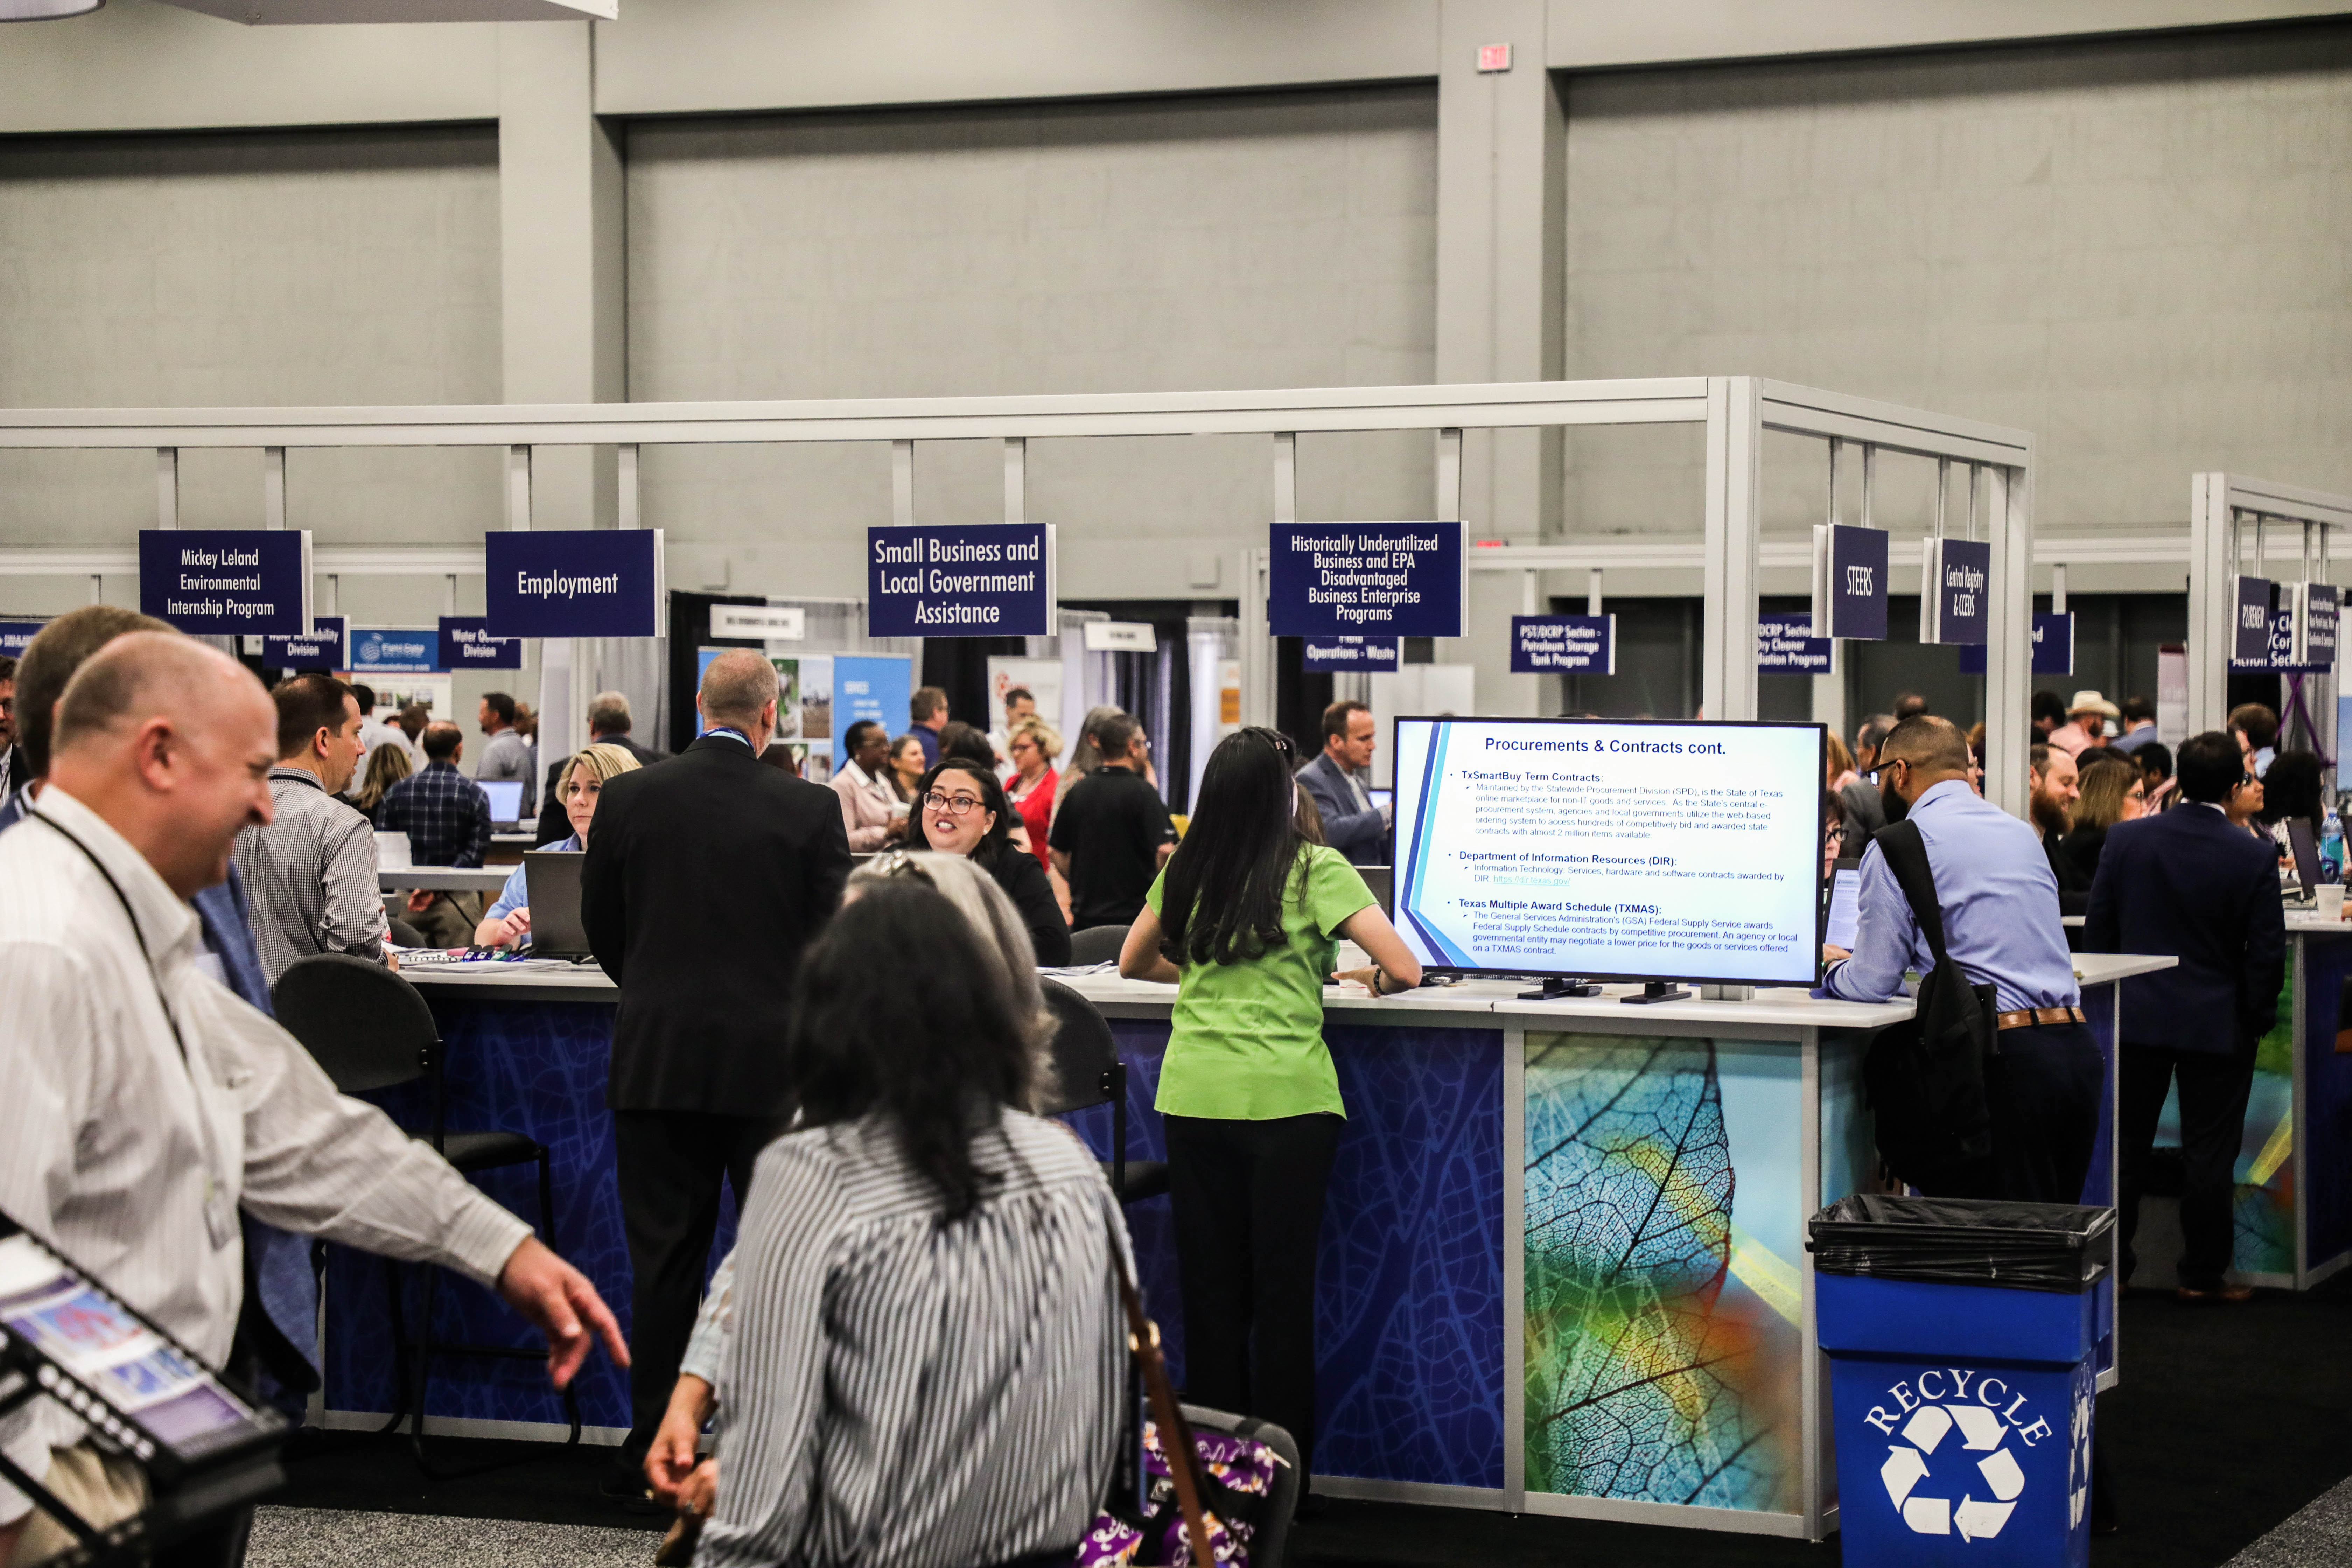 A picture showing TCEQ employees and conference attendees at TCEQ's booth in the Exhibit Hall of the Convention Center.